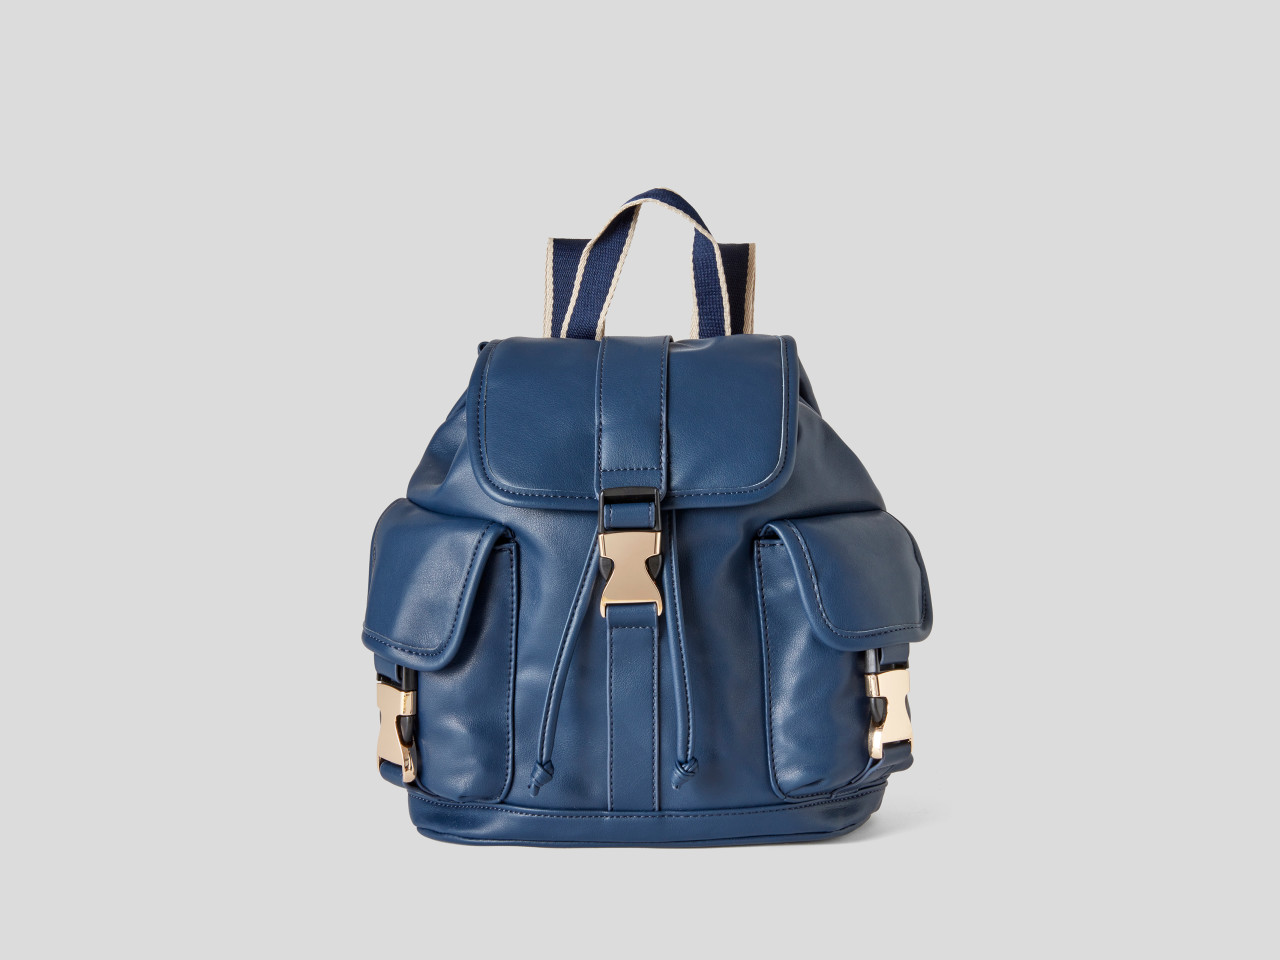 Mens Burberry blue Leather Pocket Backpack | Harrods # {CountryCode}